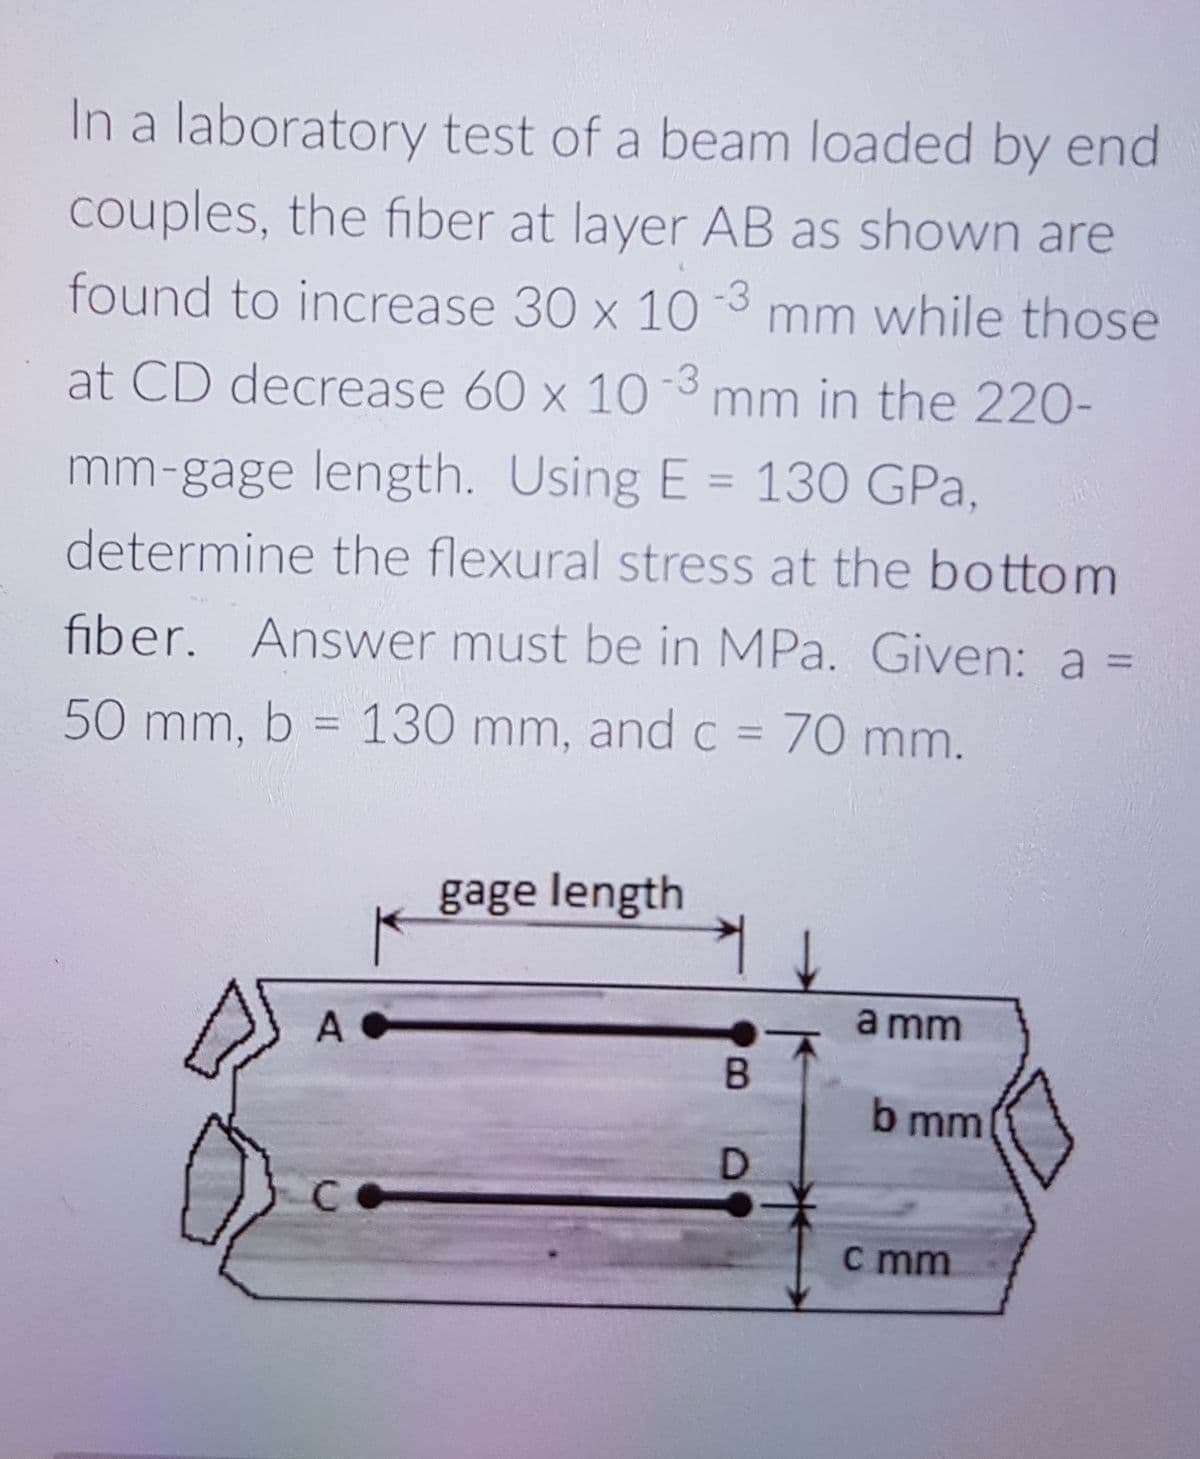 In a laboratory test of a beam loaded by end
couples, the fiber at layer AB as shown are
found to increase 30 x 10
mm while those
at CD decrease 60 x 10 3 mm in the 220-
mm-gage length. Using E = 130 GPa,
determine the flexural stress at the bottom
fiber. Answer must be in MPa. Given: a =
50 mm, b = 130 mm, and c = 70 mm.
%3D
gage length
a mm
A
b mm
D
c mm
